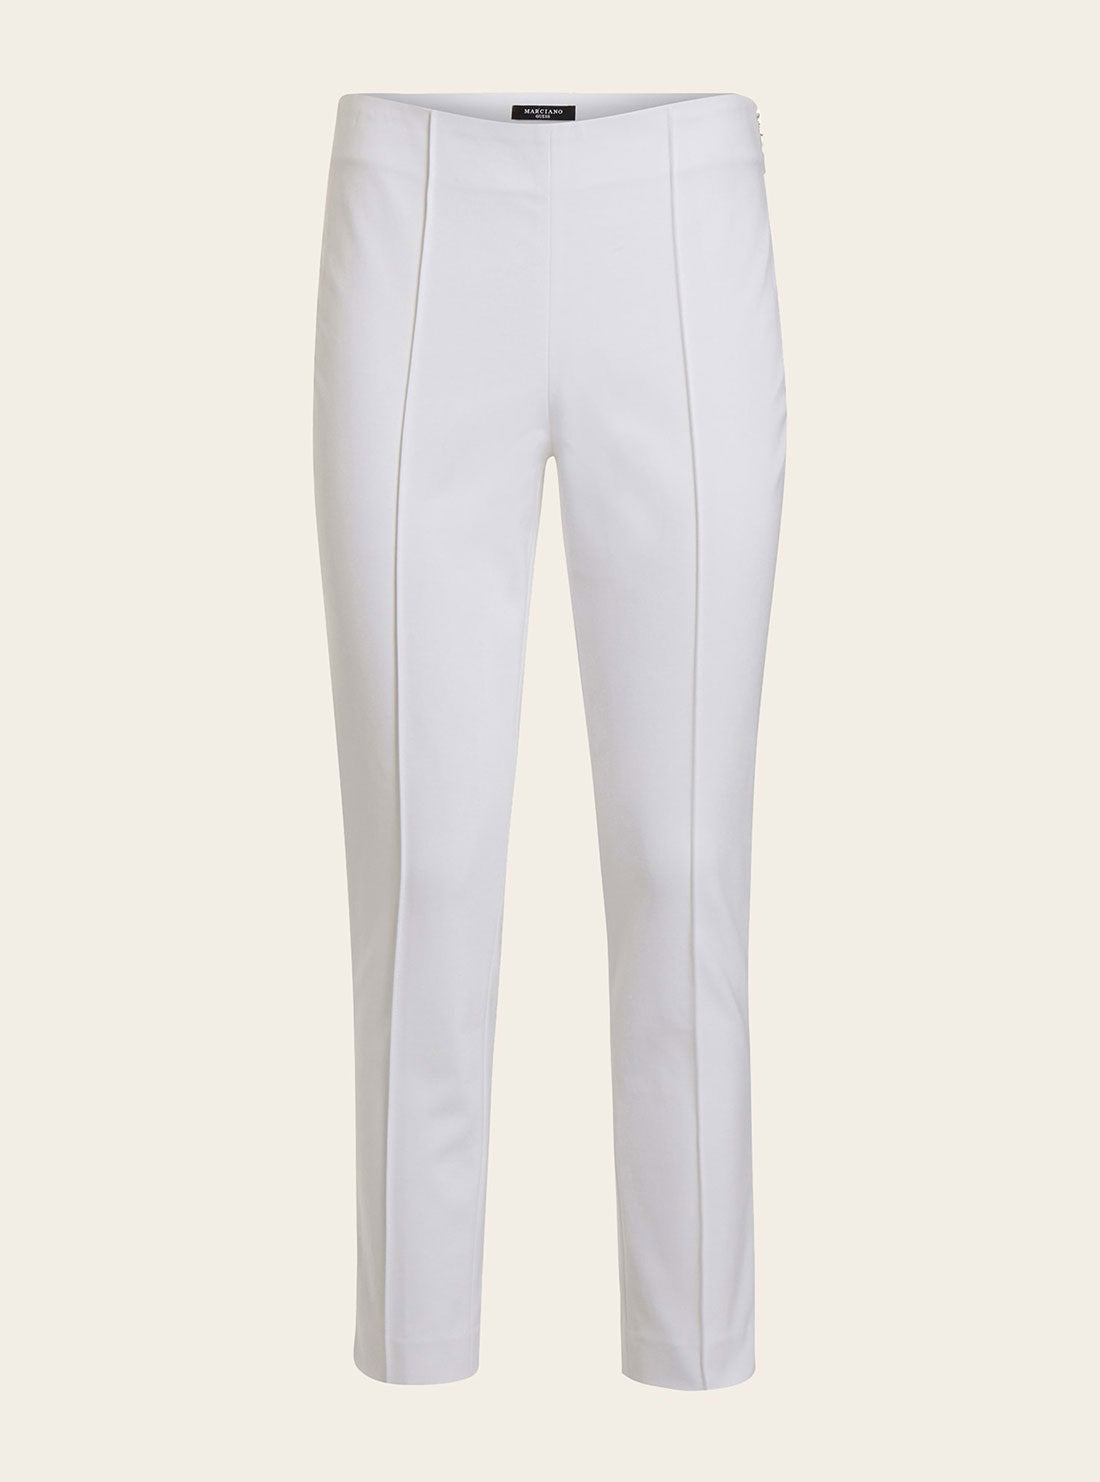 GUESS Women's Marciano White Elle High Waist Pants 2GGB127246Z Front Ghost View